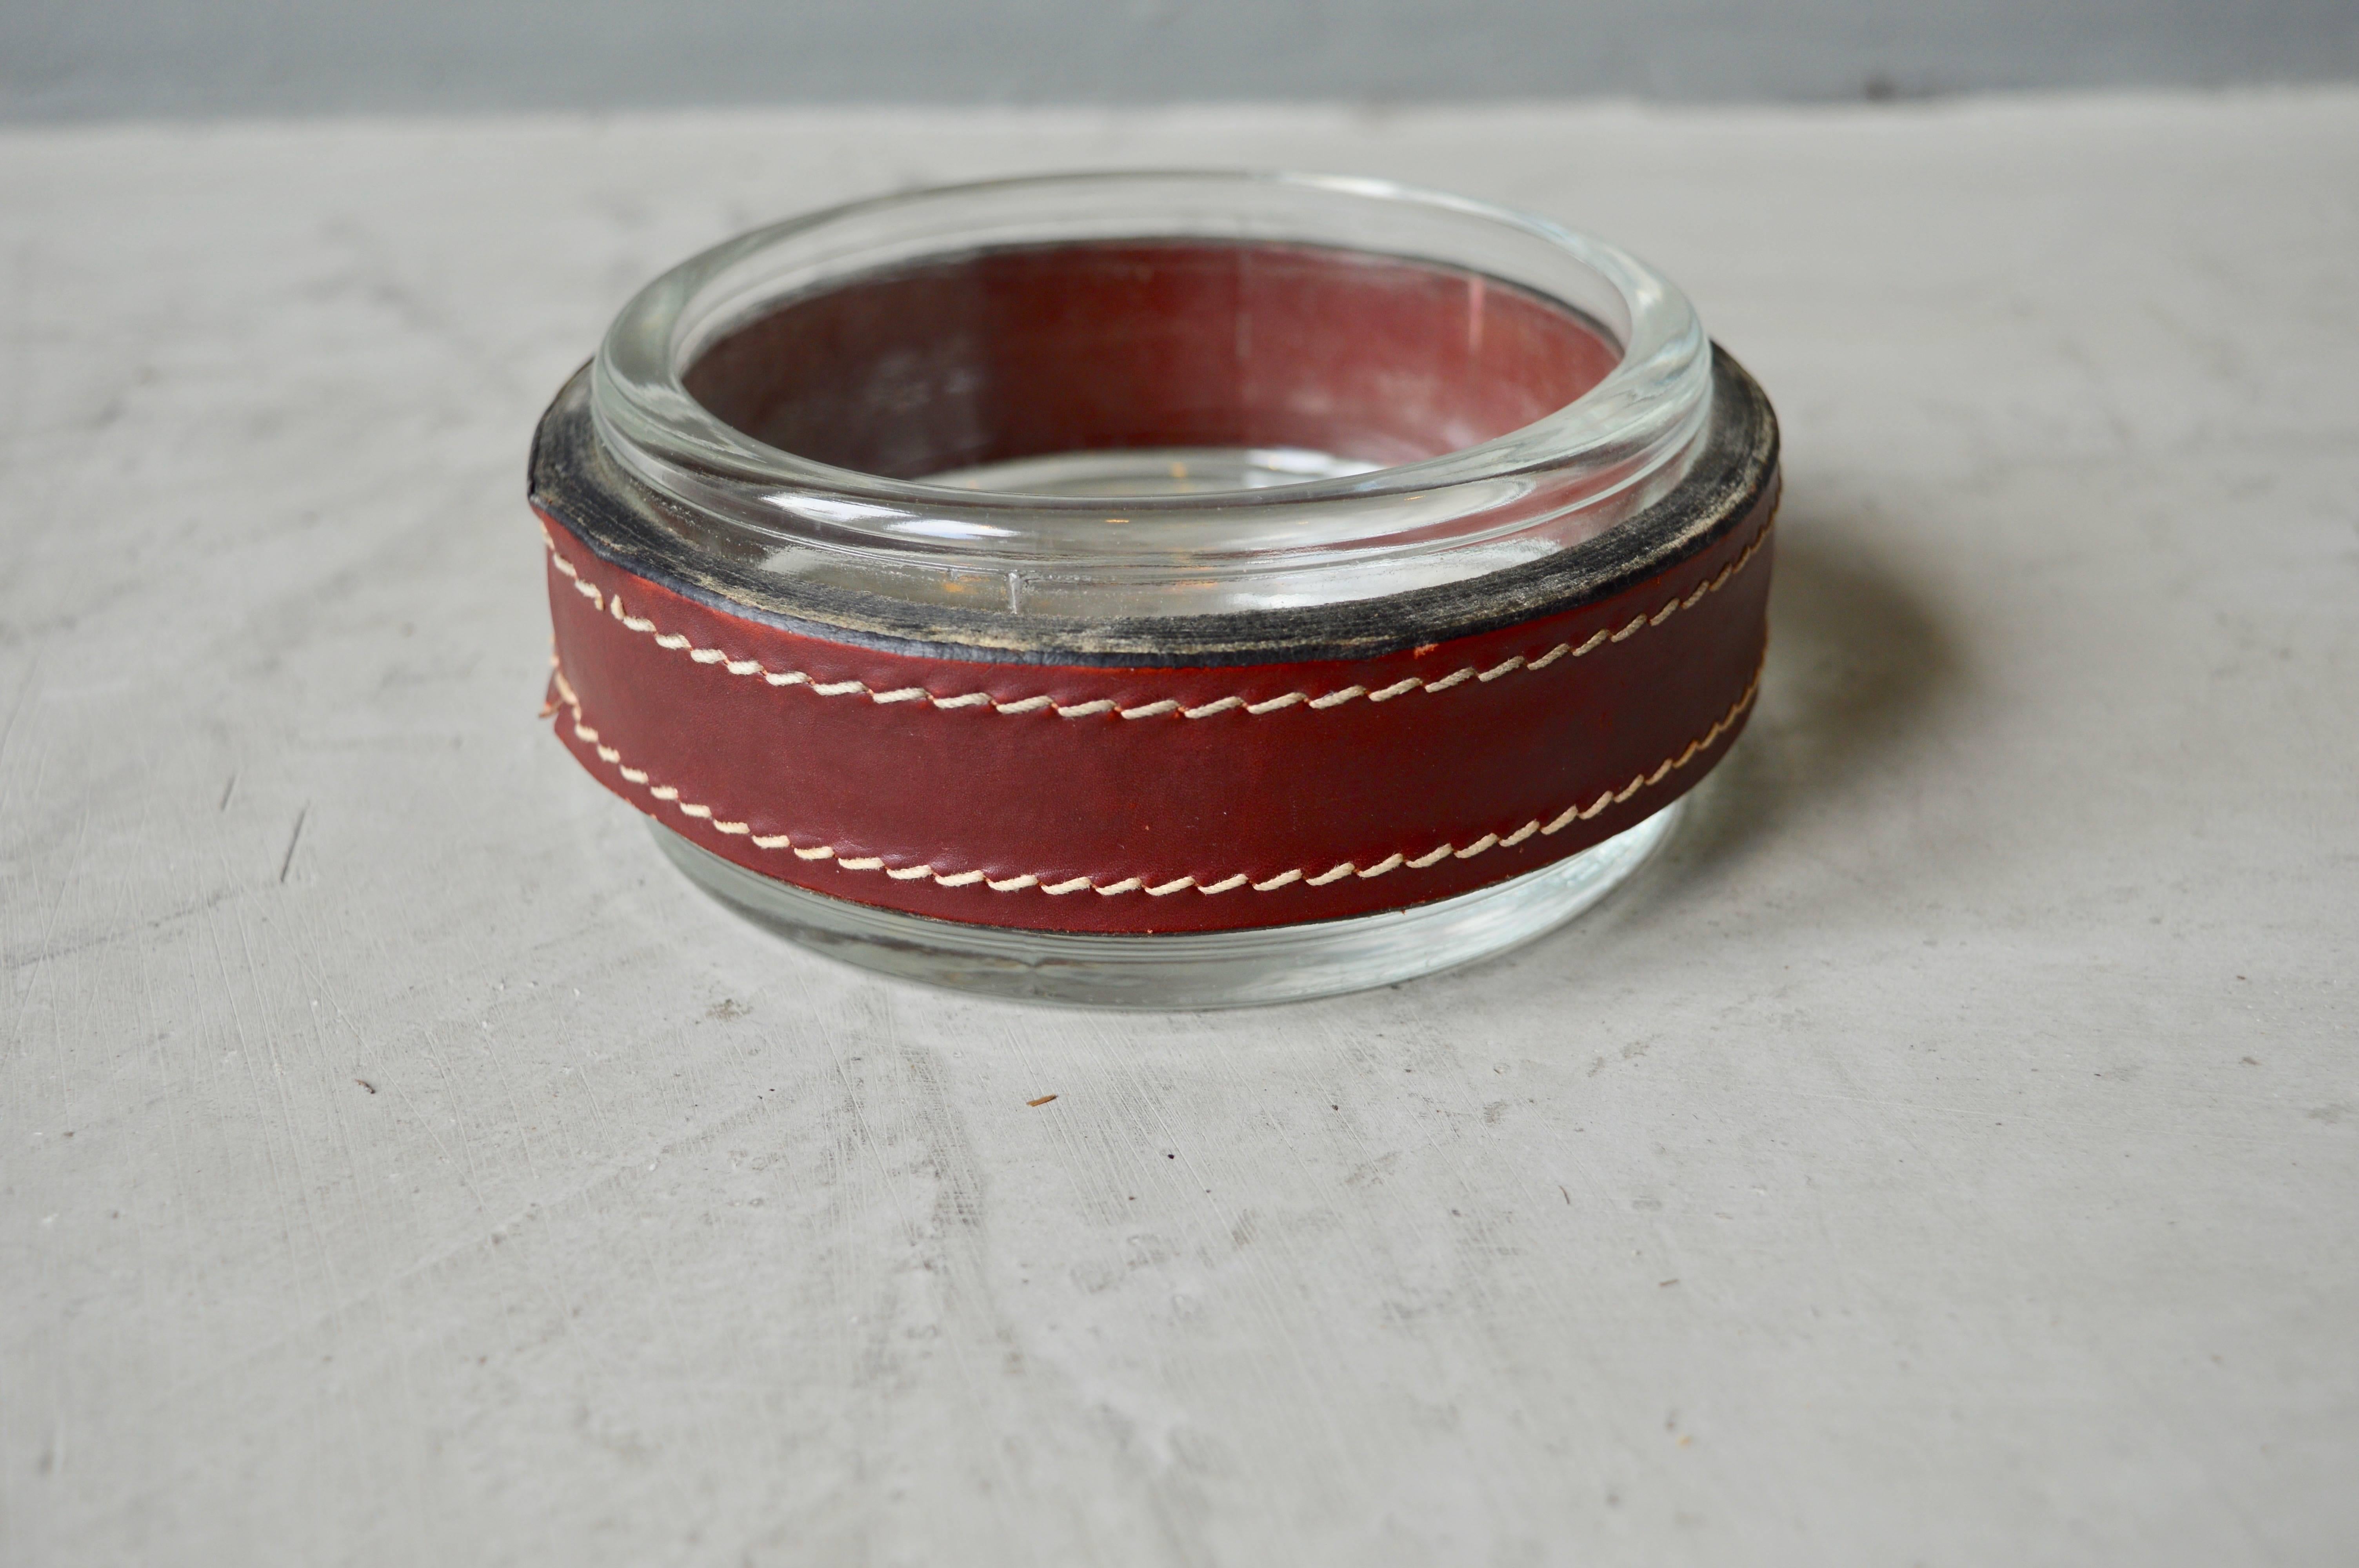 Handsome red leather and glass ashtray or catchall by French designer Jacques Adnet. Signature Adnet contrast stitching throughout. Great desktop piece or catchall to put by the front door. Excellent vintage condition.